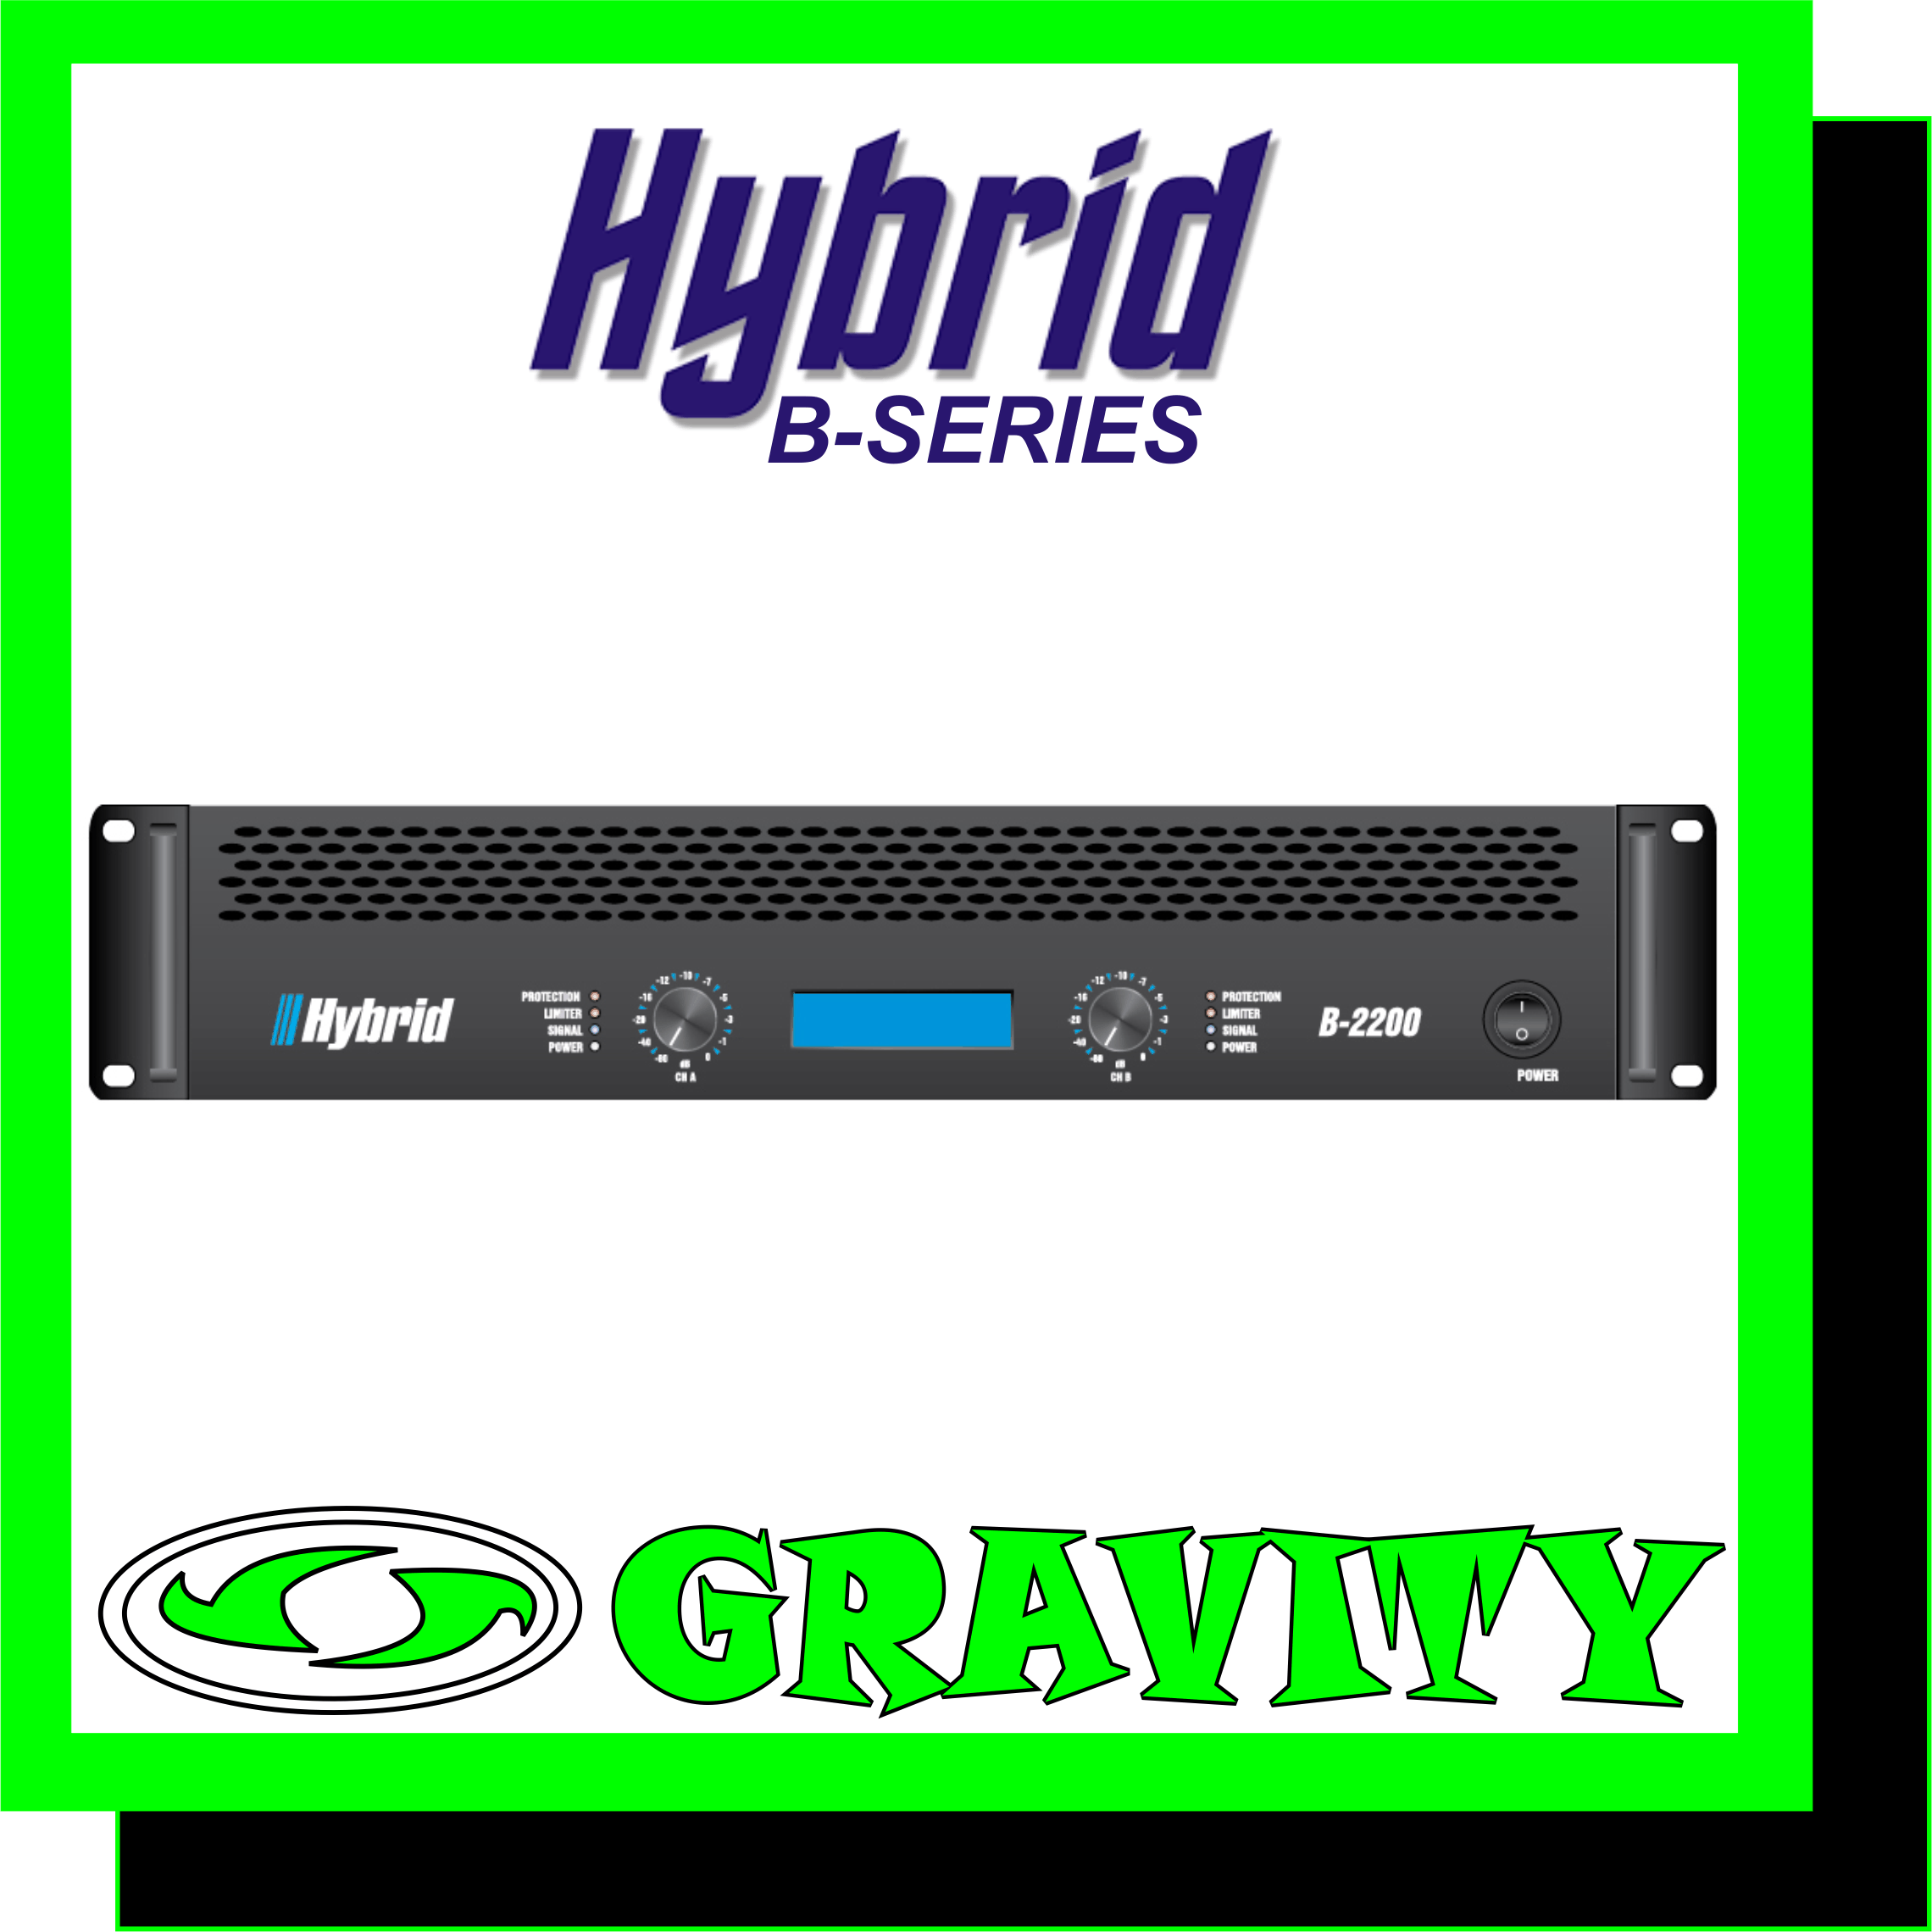 Hybrid B2200MK5 2X1100W Power Amplifier   8Ohm Stereo Power . RMS/CH 700W 4Ohm Stereo Power . RMS/CH 1100W 8Ohm Bridged Mono Power . RMS 2100W  Frequency Response ( 1W/8O) 20Hz 20KHz +/- 3dB Protection DC Protection . Short Circuit Protection . Thermal Protection . Inrush Current Protection . Soft Start Portection . Input & Overload Protection THD+N (20Hz-20KHz) <0.1% Damping Factor (1KHz @ 8O) >500 Hum & Noise(A weighted . -80dBW) 100dB Input Impedance (Balanced / Unbalanced) 20K Ohm / 10K Ohm Crosstalk (20Hz-20KHz Rated Power 8O) >60dB Cooling 2 x Fans . Dual speed . Front to Rear Airflow  Input Connectors Jack/Female XLR Neutrik Combo + Male XLR Neutrik Output Connectors 3x Neutrik Speakon Dimensions (WxHxD) mm 483 x 88 x 430 Weight Kg 20